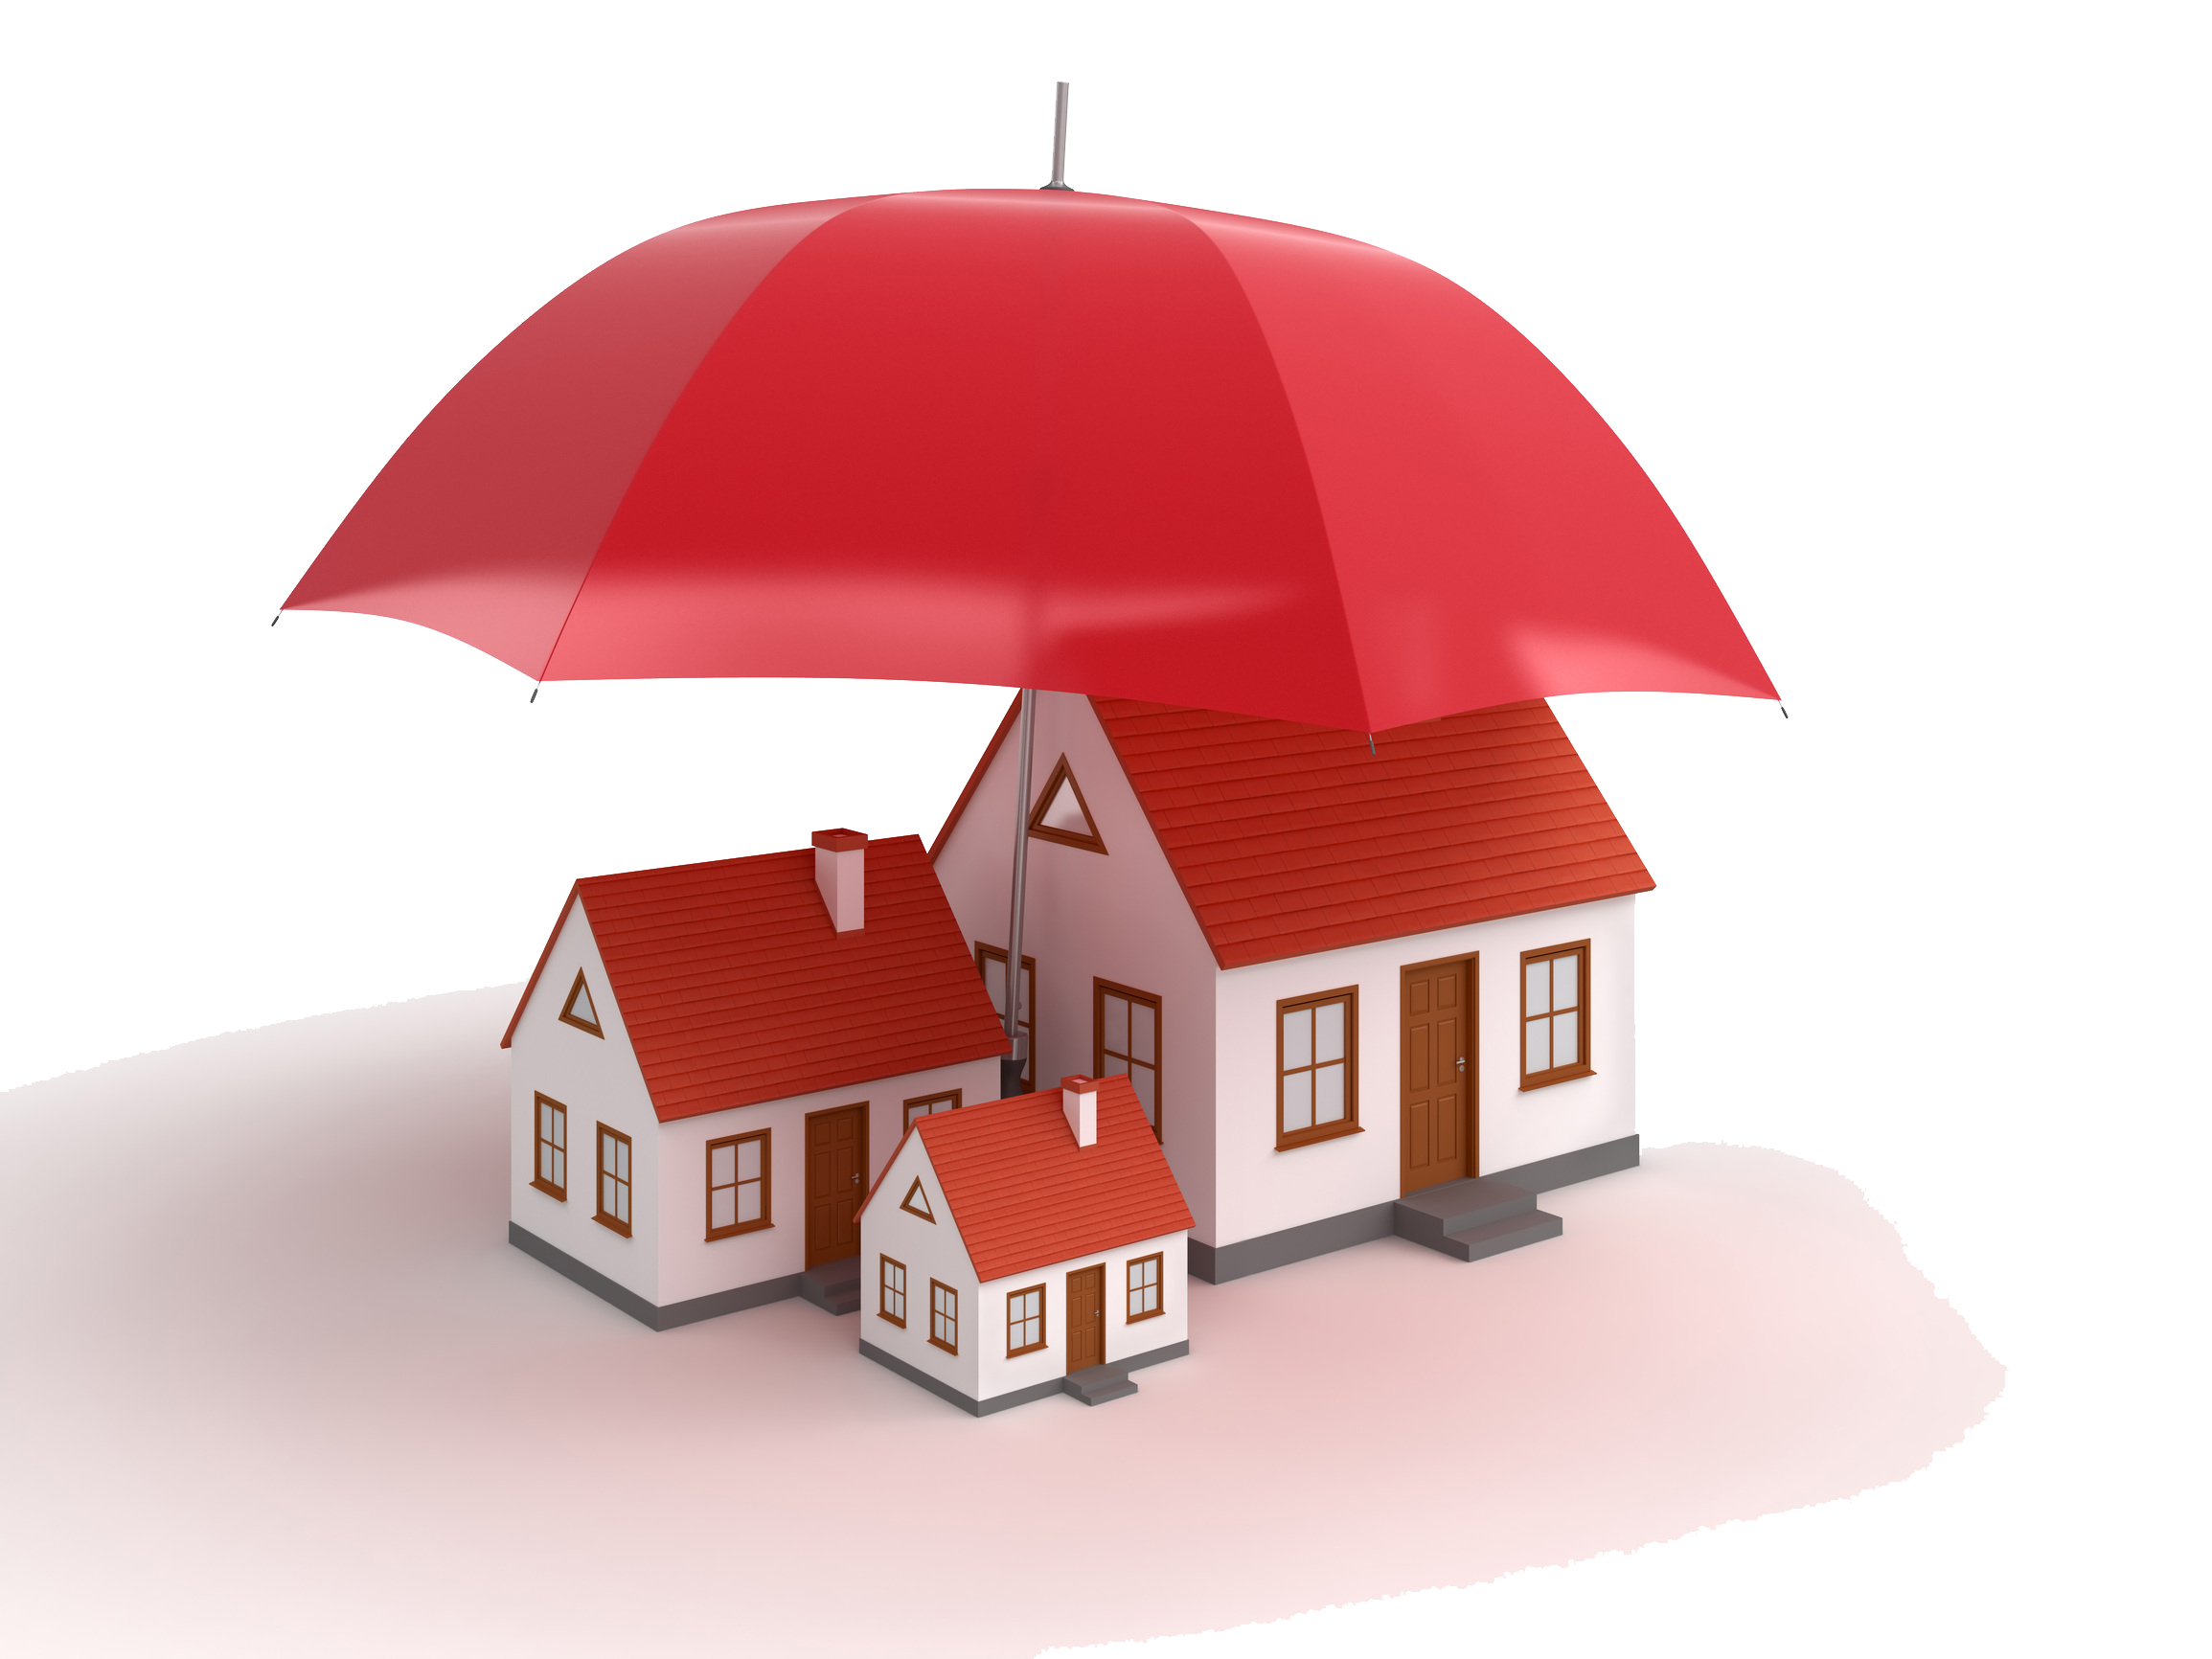 Home Insurance, Home Insurance in India, Home Cover, Risk with house, House risk cover, India real estate companies, Indian property news, Track2Realty, Insurance companies in housing